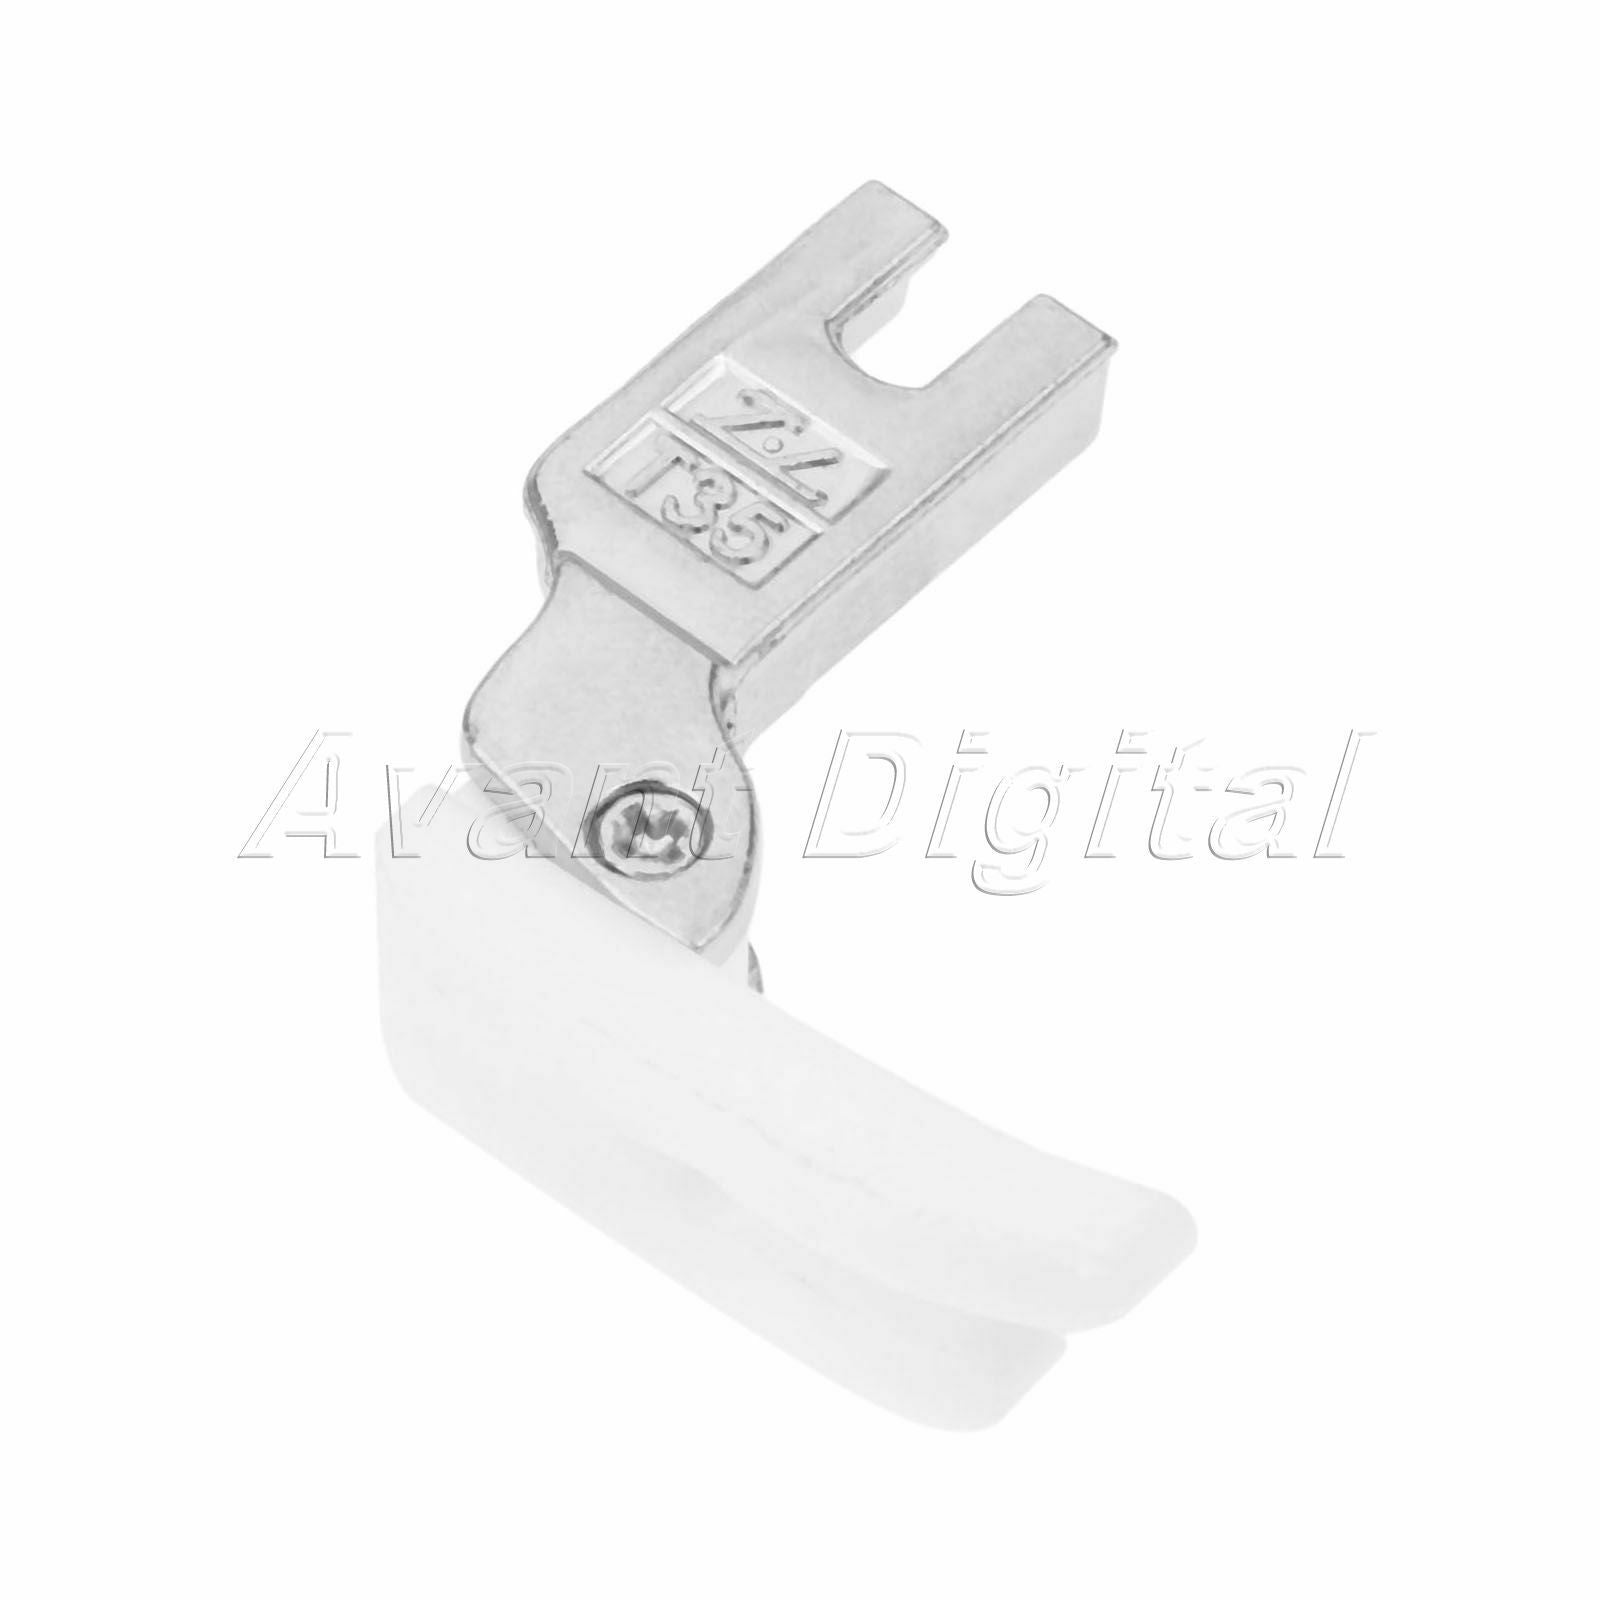 2Pcs High Shank Plastic Presser Foot For Industrial Single Needle Sewing Machine